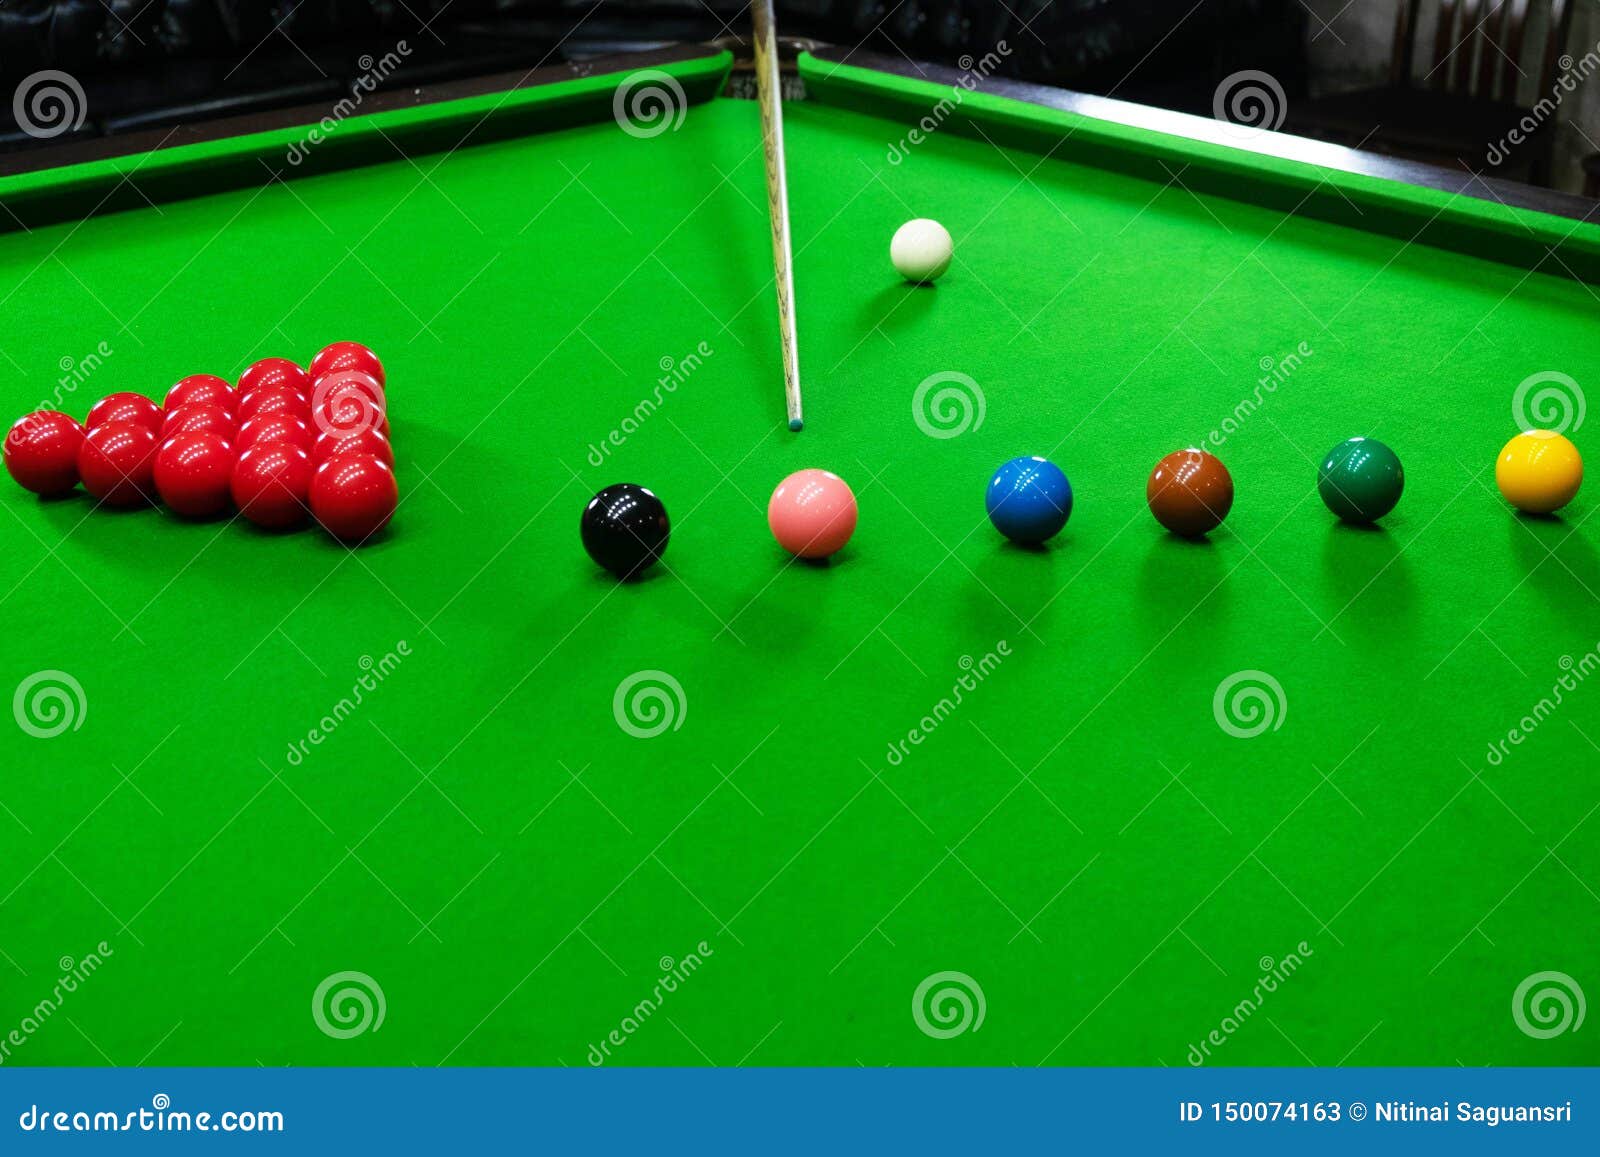 Playing Snooker, Piercing the Red Ball, Black, Aiming the Ball and Pocketing the Hole To Score Points Stock Image